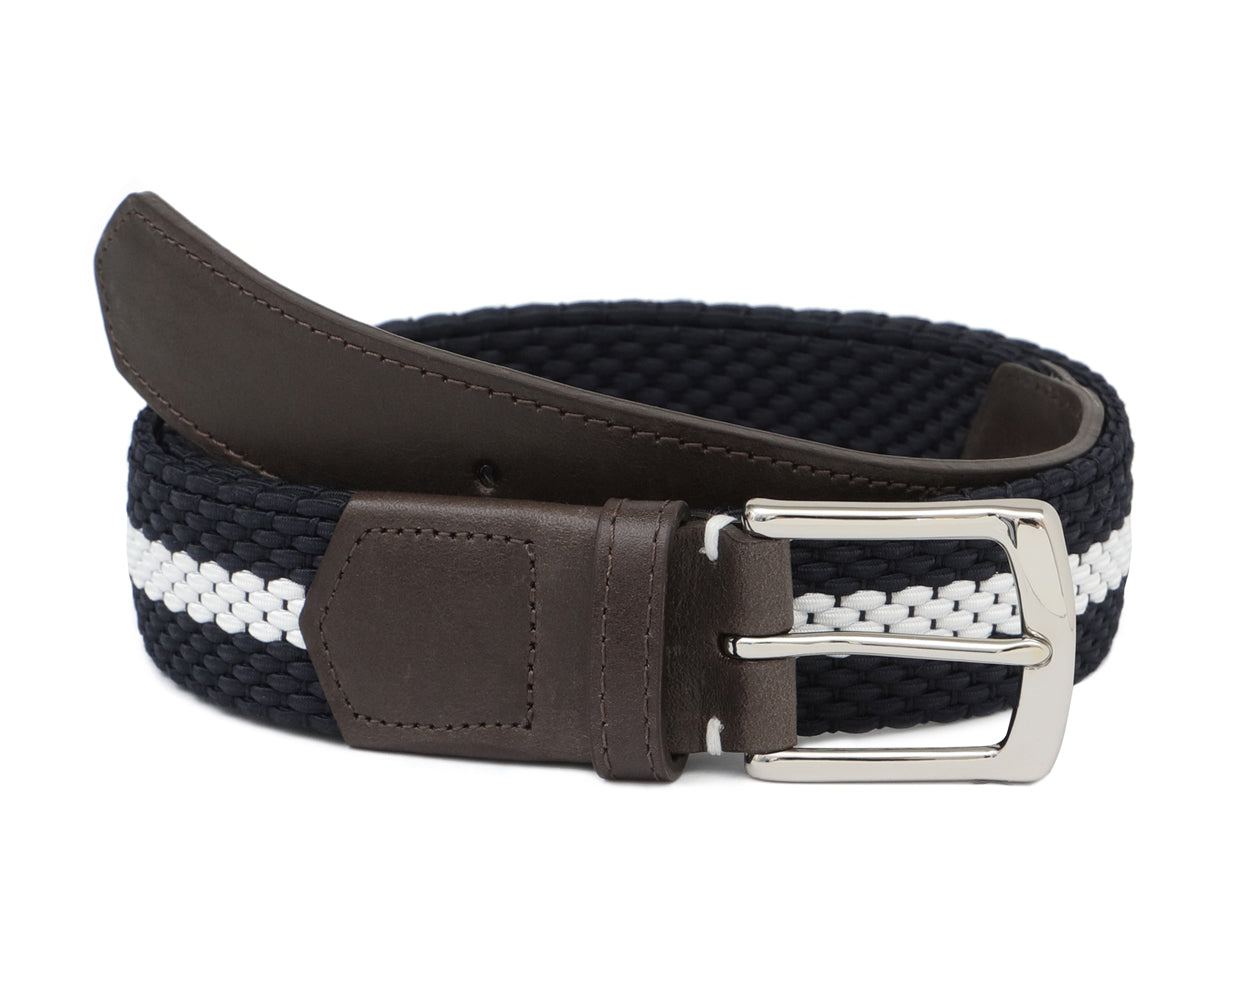 Holderness and Bourne woven navy and white belt with brown leather detailing and silver buckle.